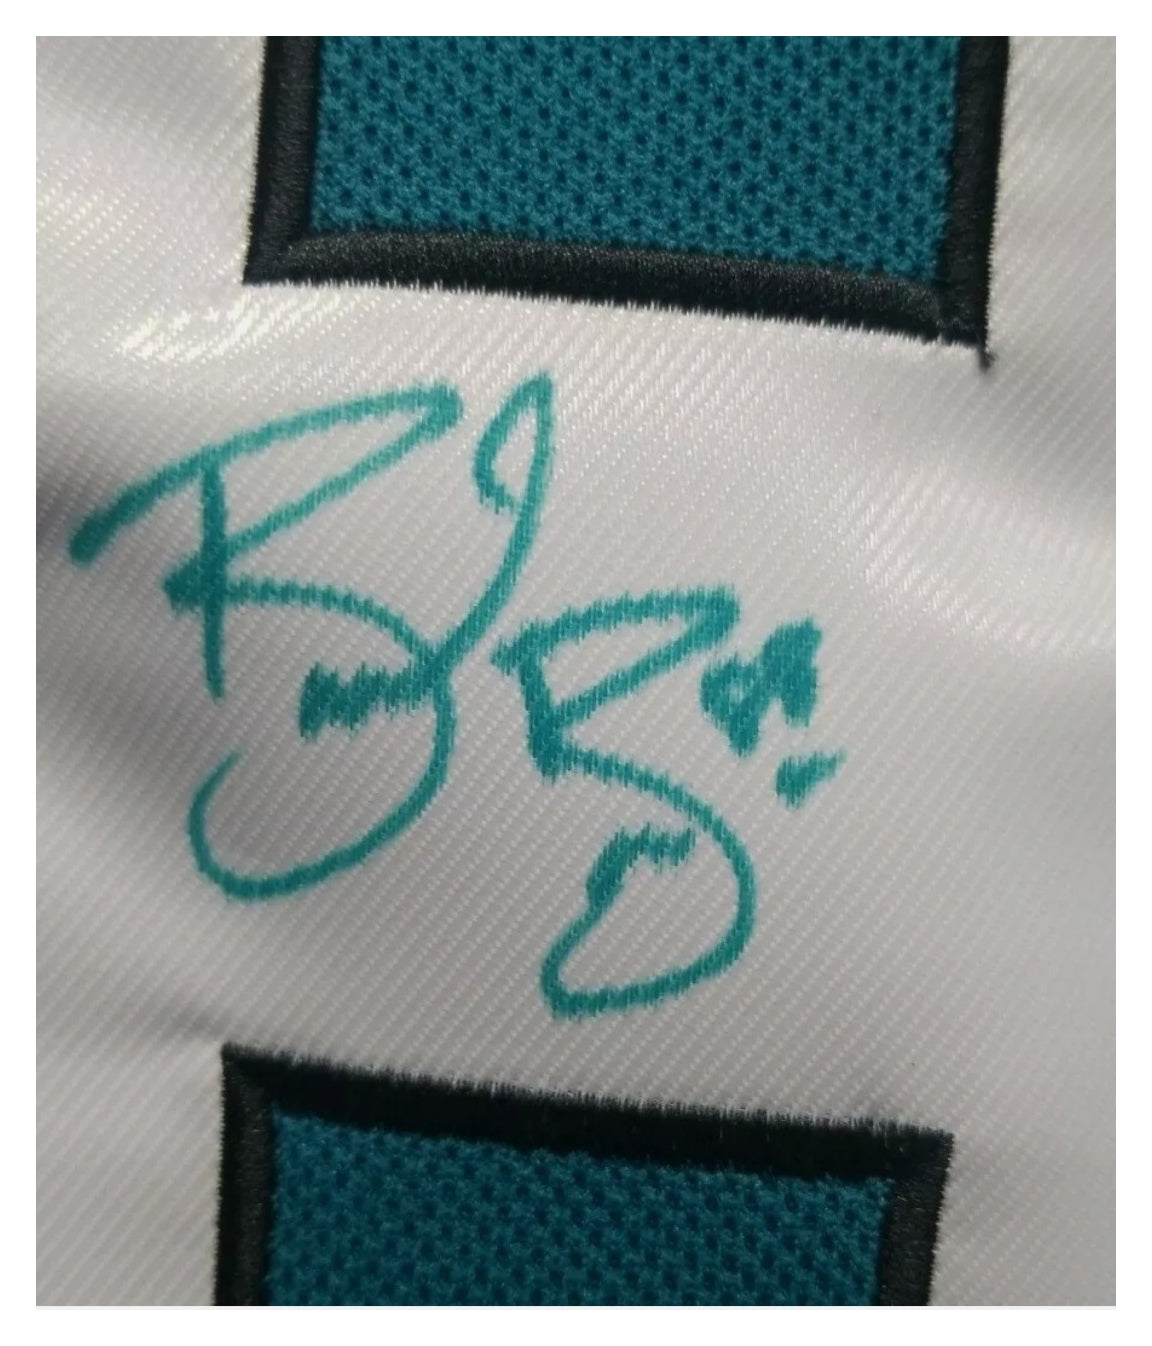 Brent Burns Autographed San Jose Sharks Teal Jersey, Includes two